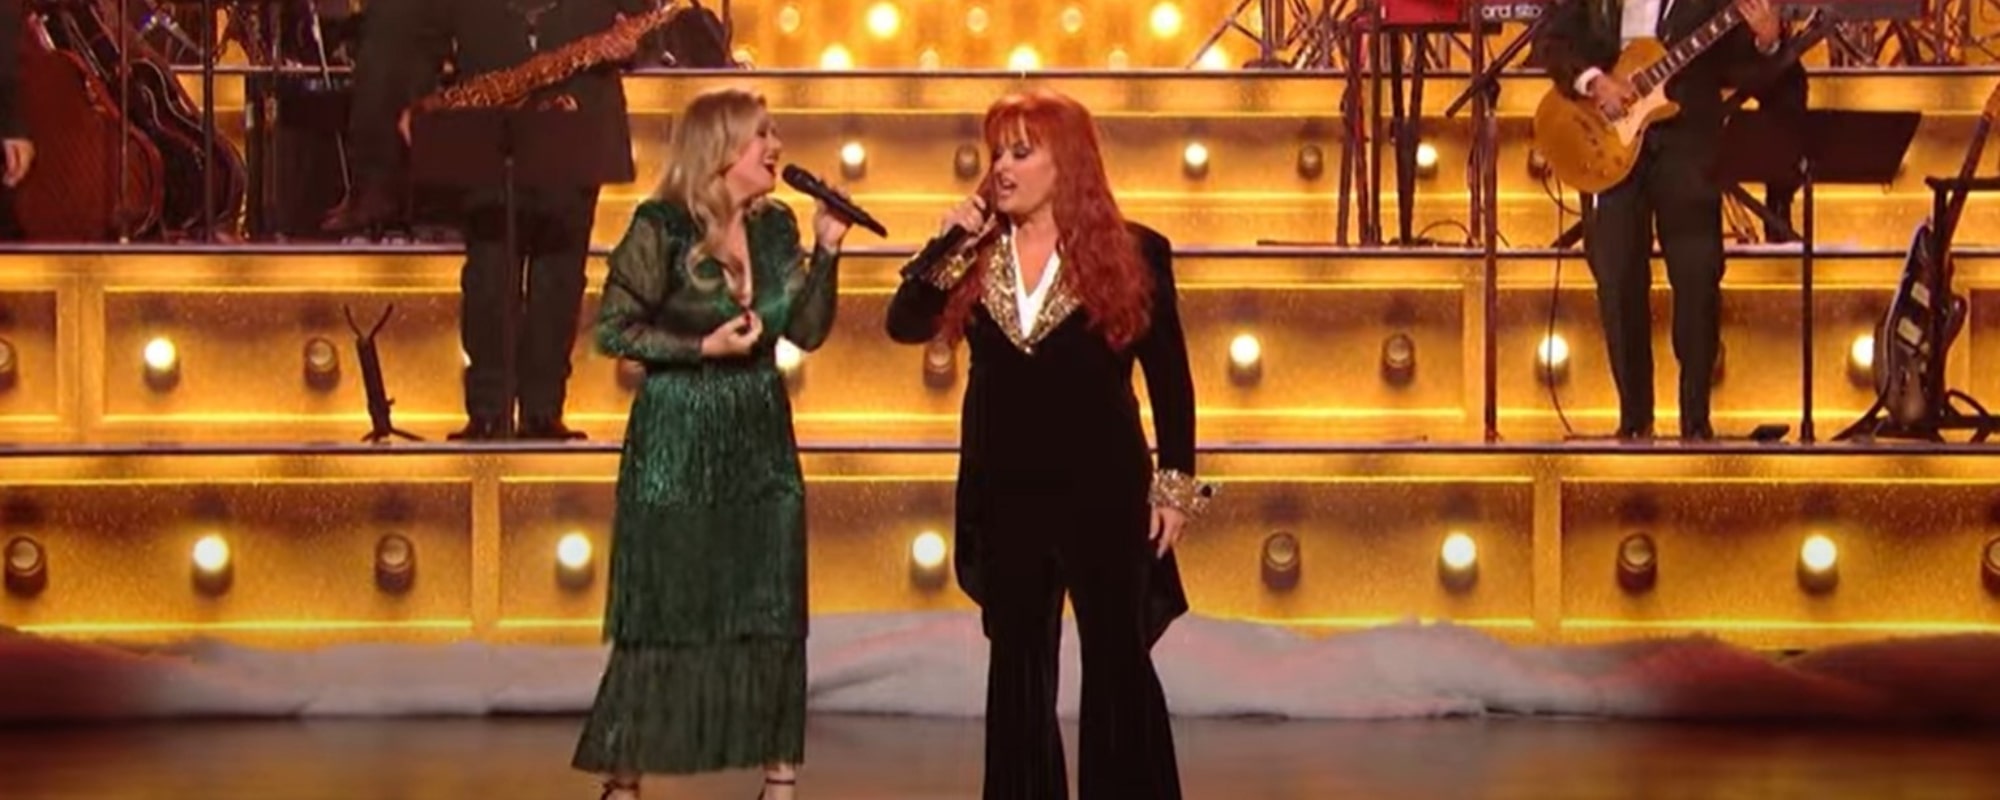 Watch: Wynonna Judd and Kelly Clarkson Bring the Holiday Spirit with “Santa Claus Is Comin’ to Town” During ‘Christmas at the Opry’